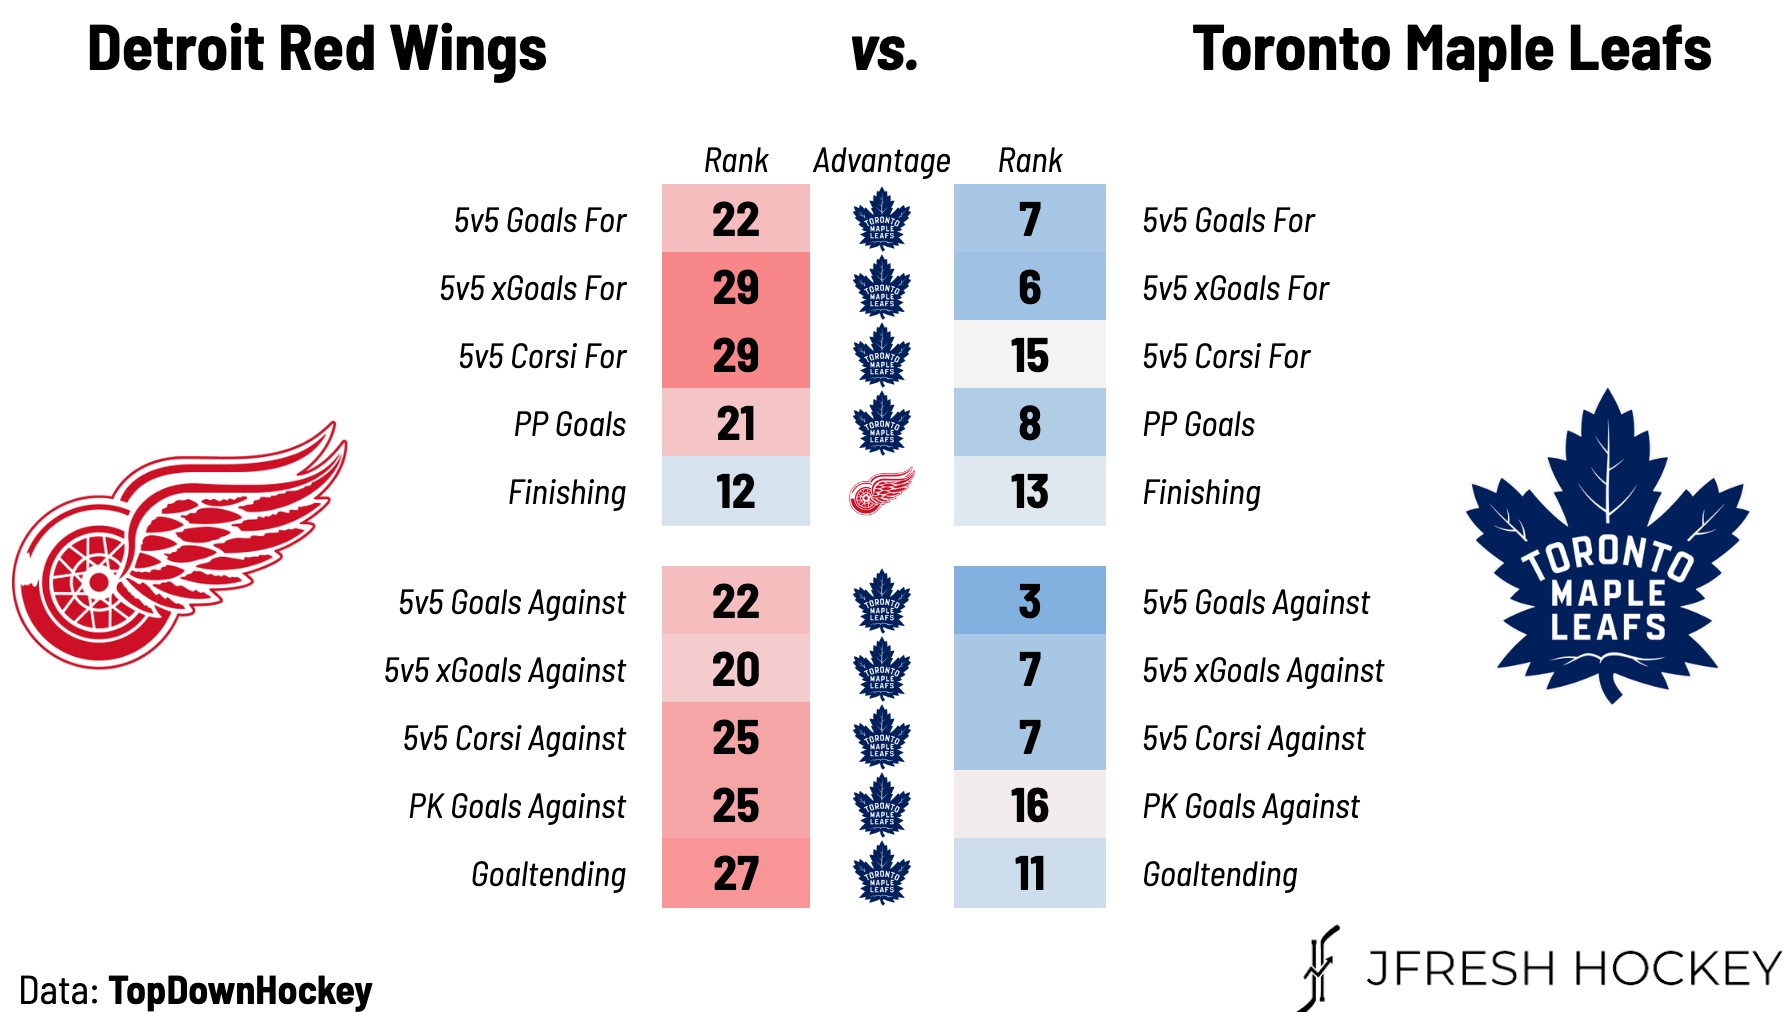 Toronto Maple Leafs at Detroit Red Wings - Game #43 Preview, Projected  Lines & TV Info